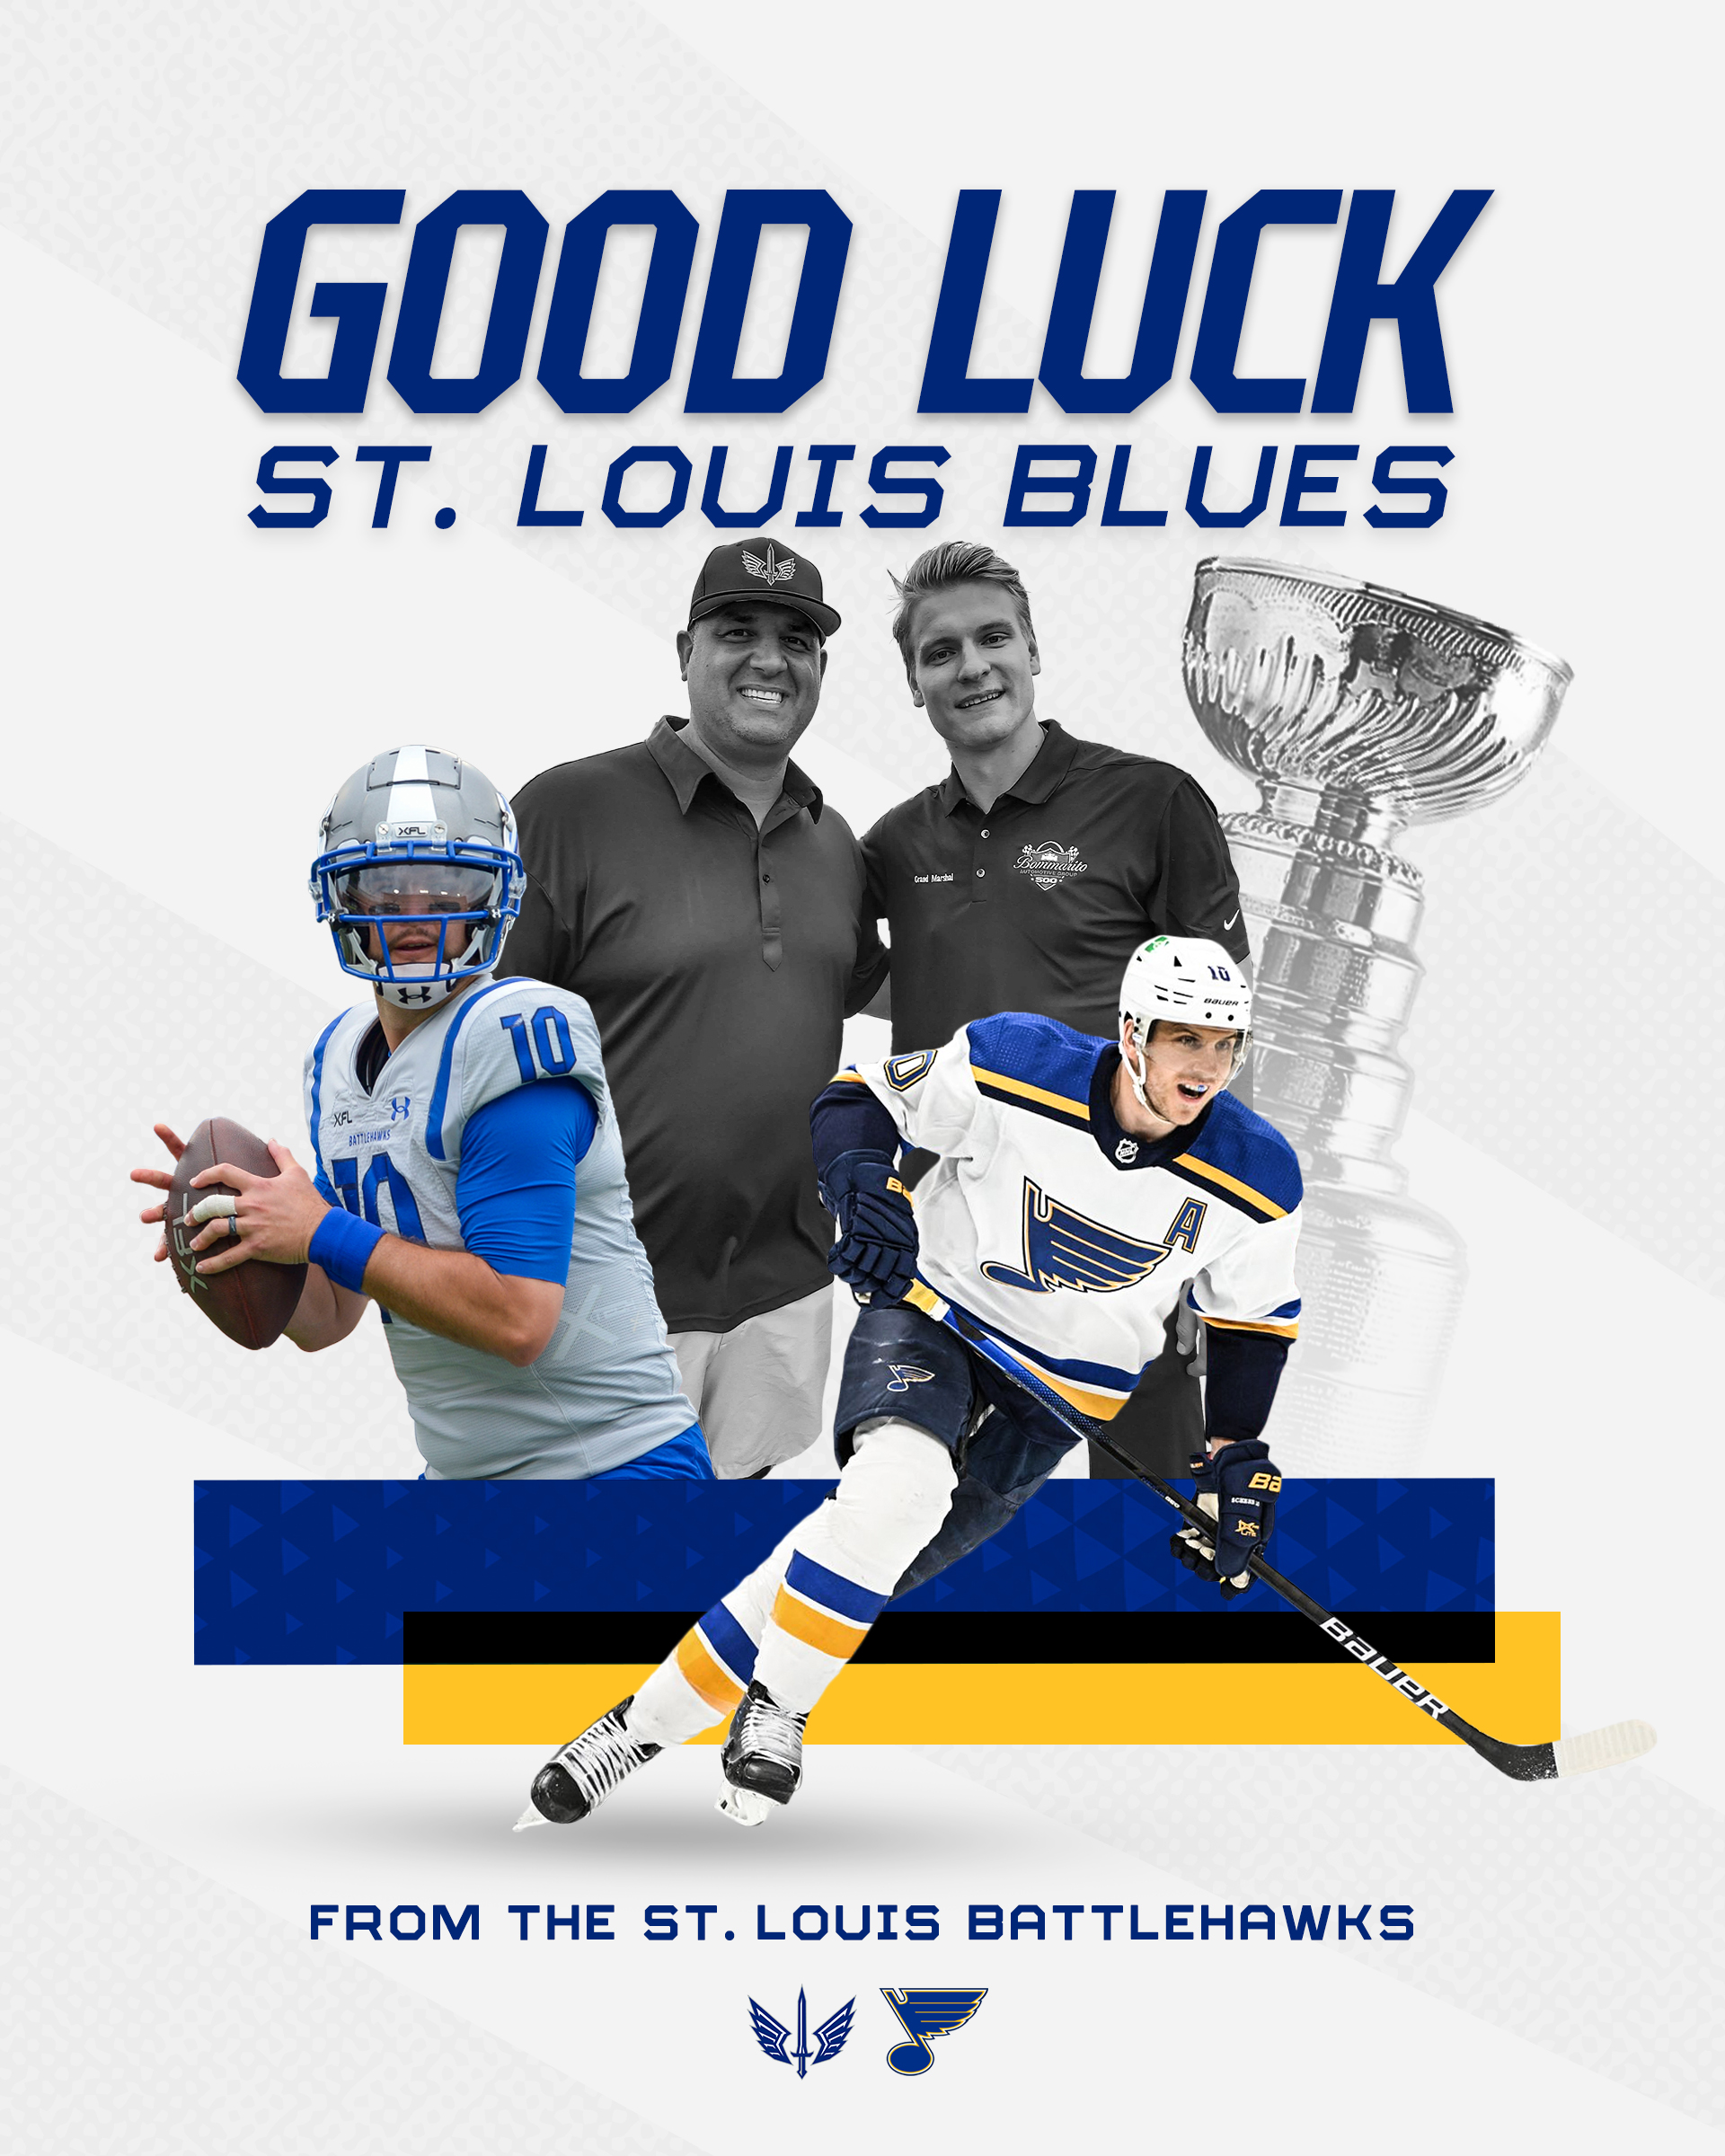 St. Louis Battlehawks on X: St. Louis: Ready to attack when the